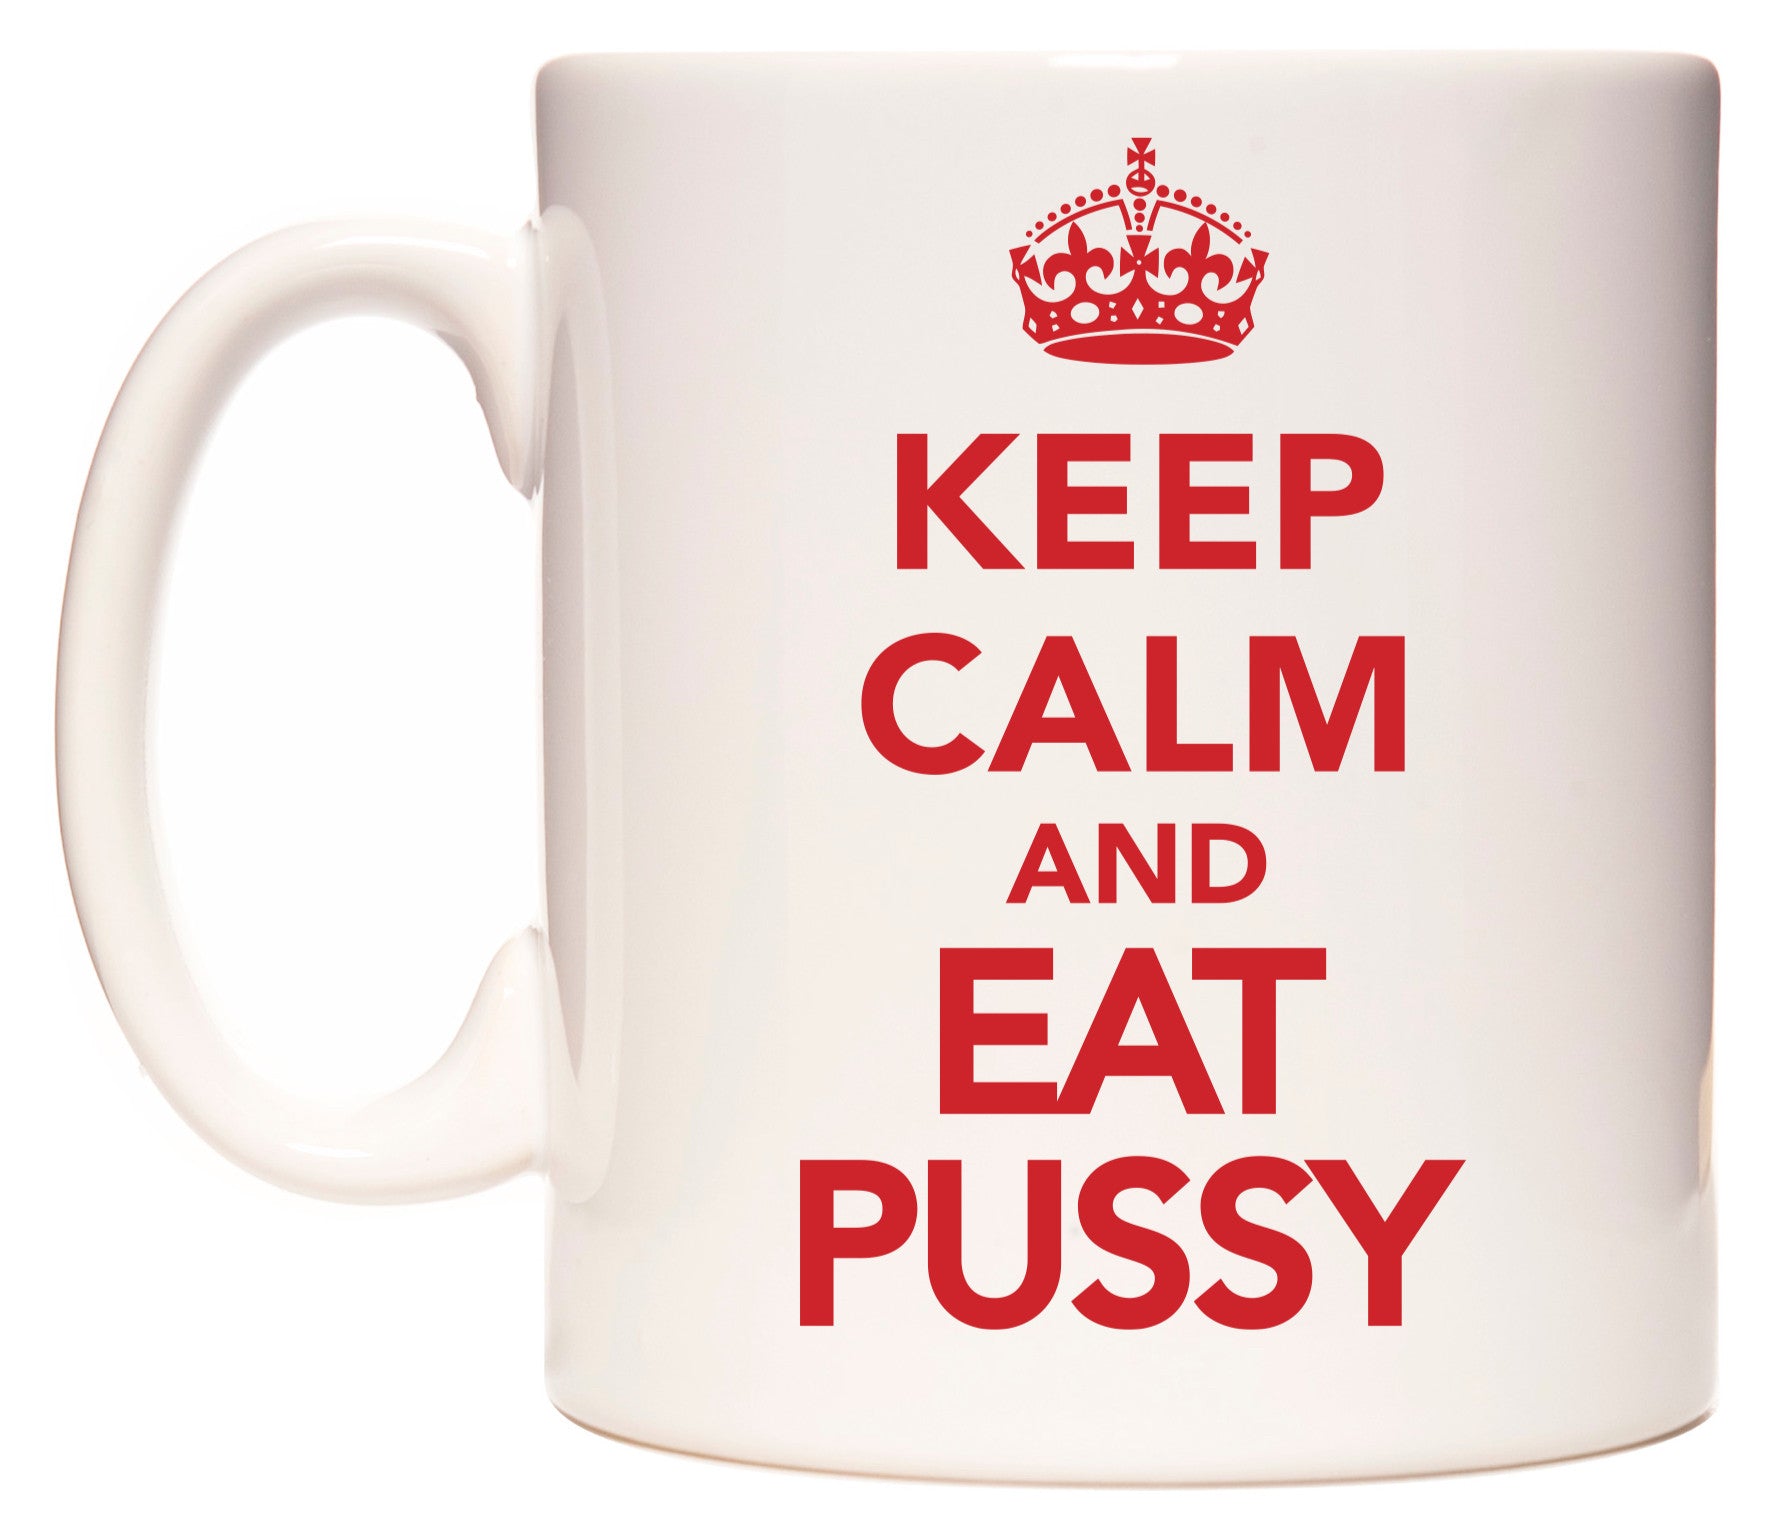 This mug features KEEP CALM AND EAT P***Y